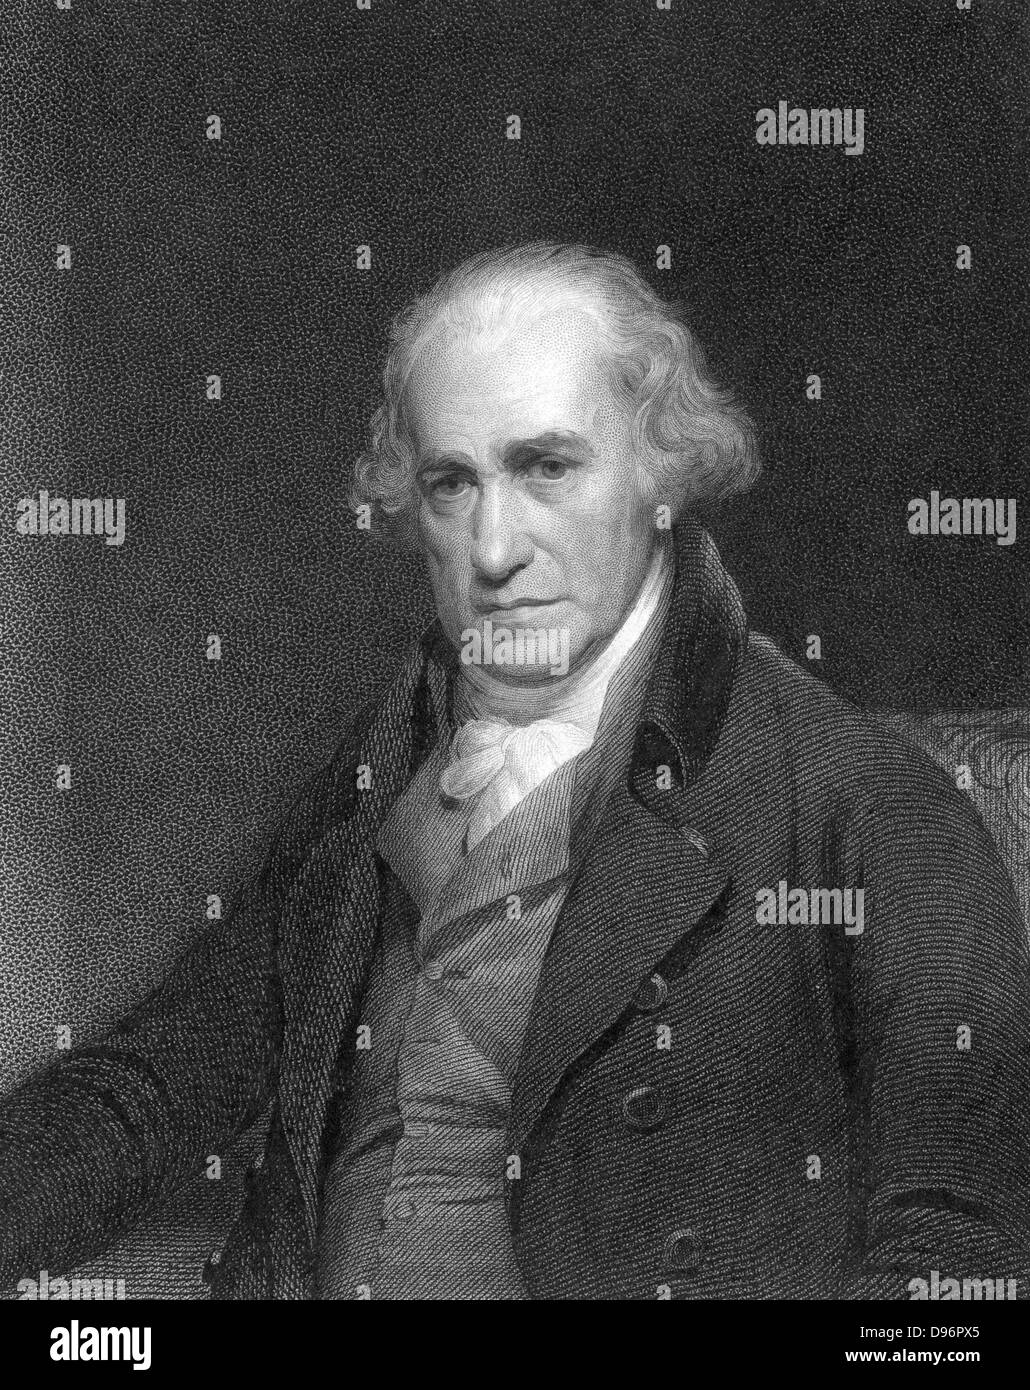 James Watt, Scottish engineer and inventor.    Watt (1736-1819) made great improvements to the steam engine, one of the most significant being the separate condenser.  In 1774 he went into partnership with Matthew Boulton (1728-1809) the Birmingham manufacturer and entrepreneur. From 'The Gallery of Portraits', London, 1833. Engraving. Stock Photo